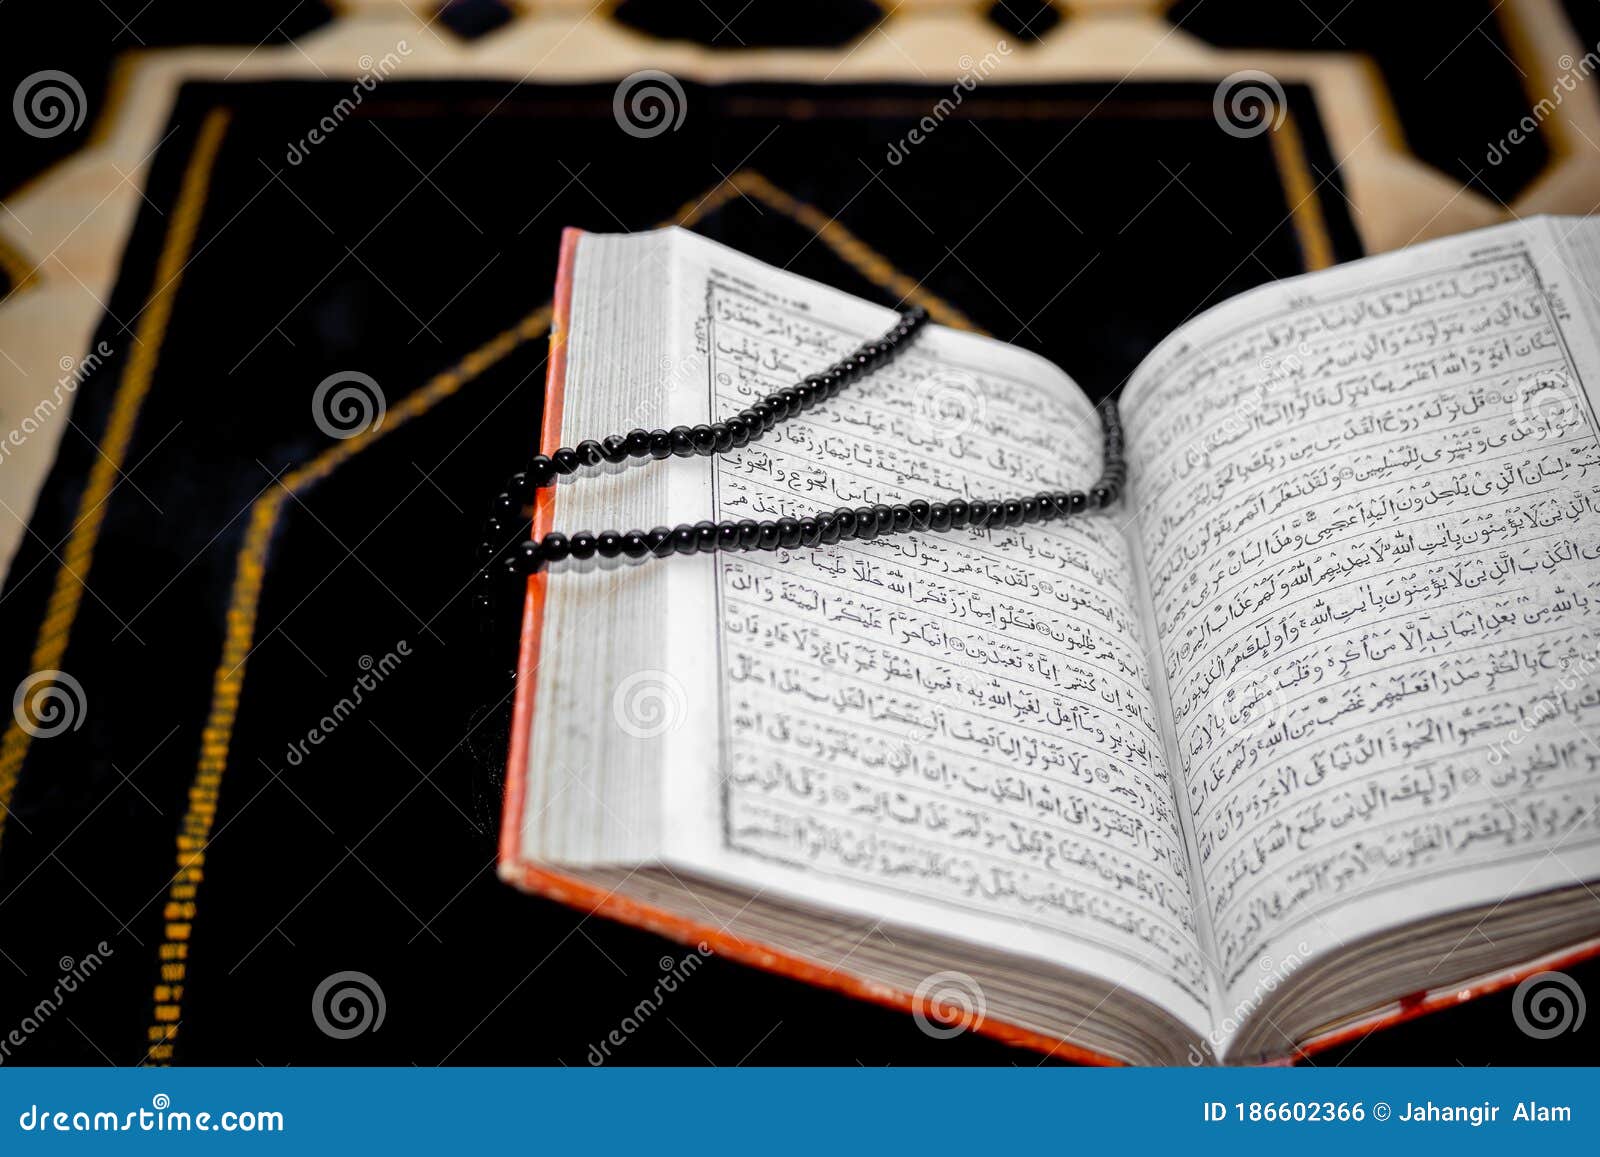 An Open the Holy Quran with Black Tasbeeh. Stock Photo - Image of ...